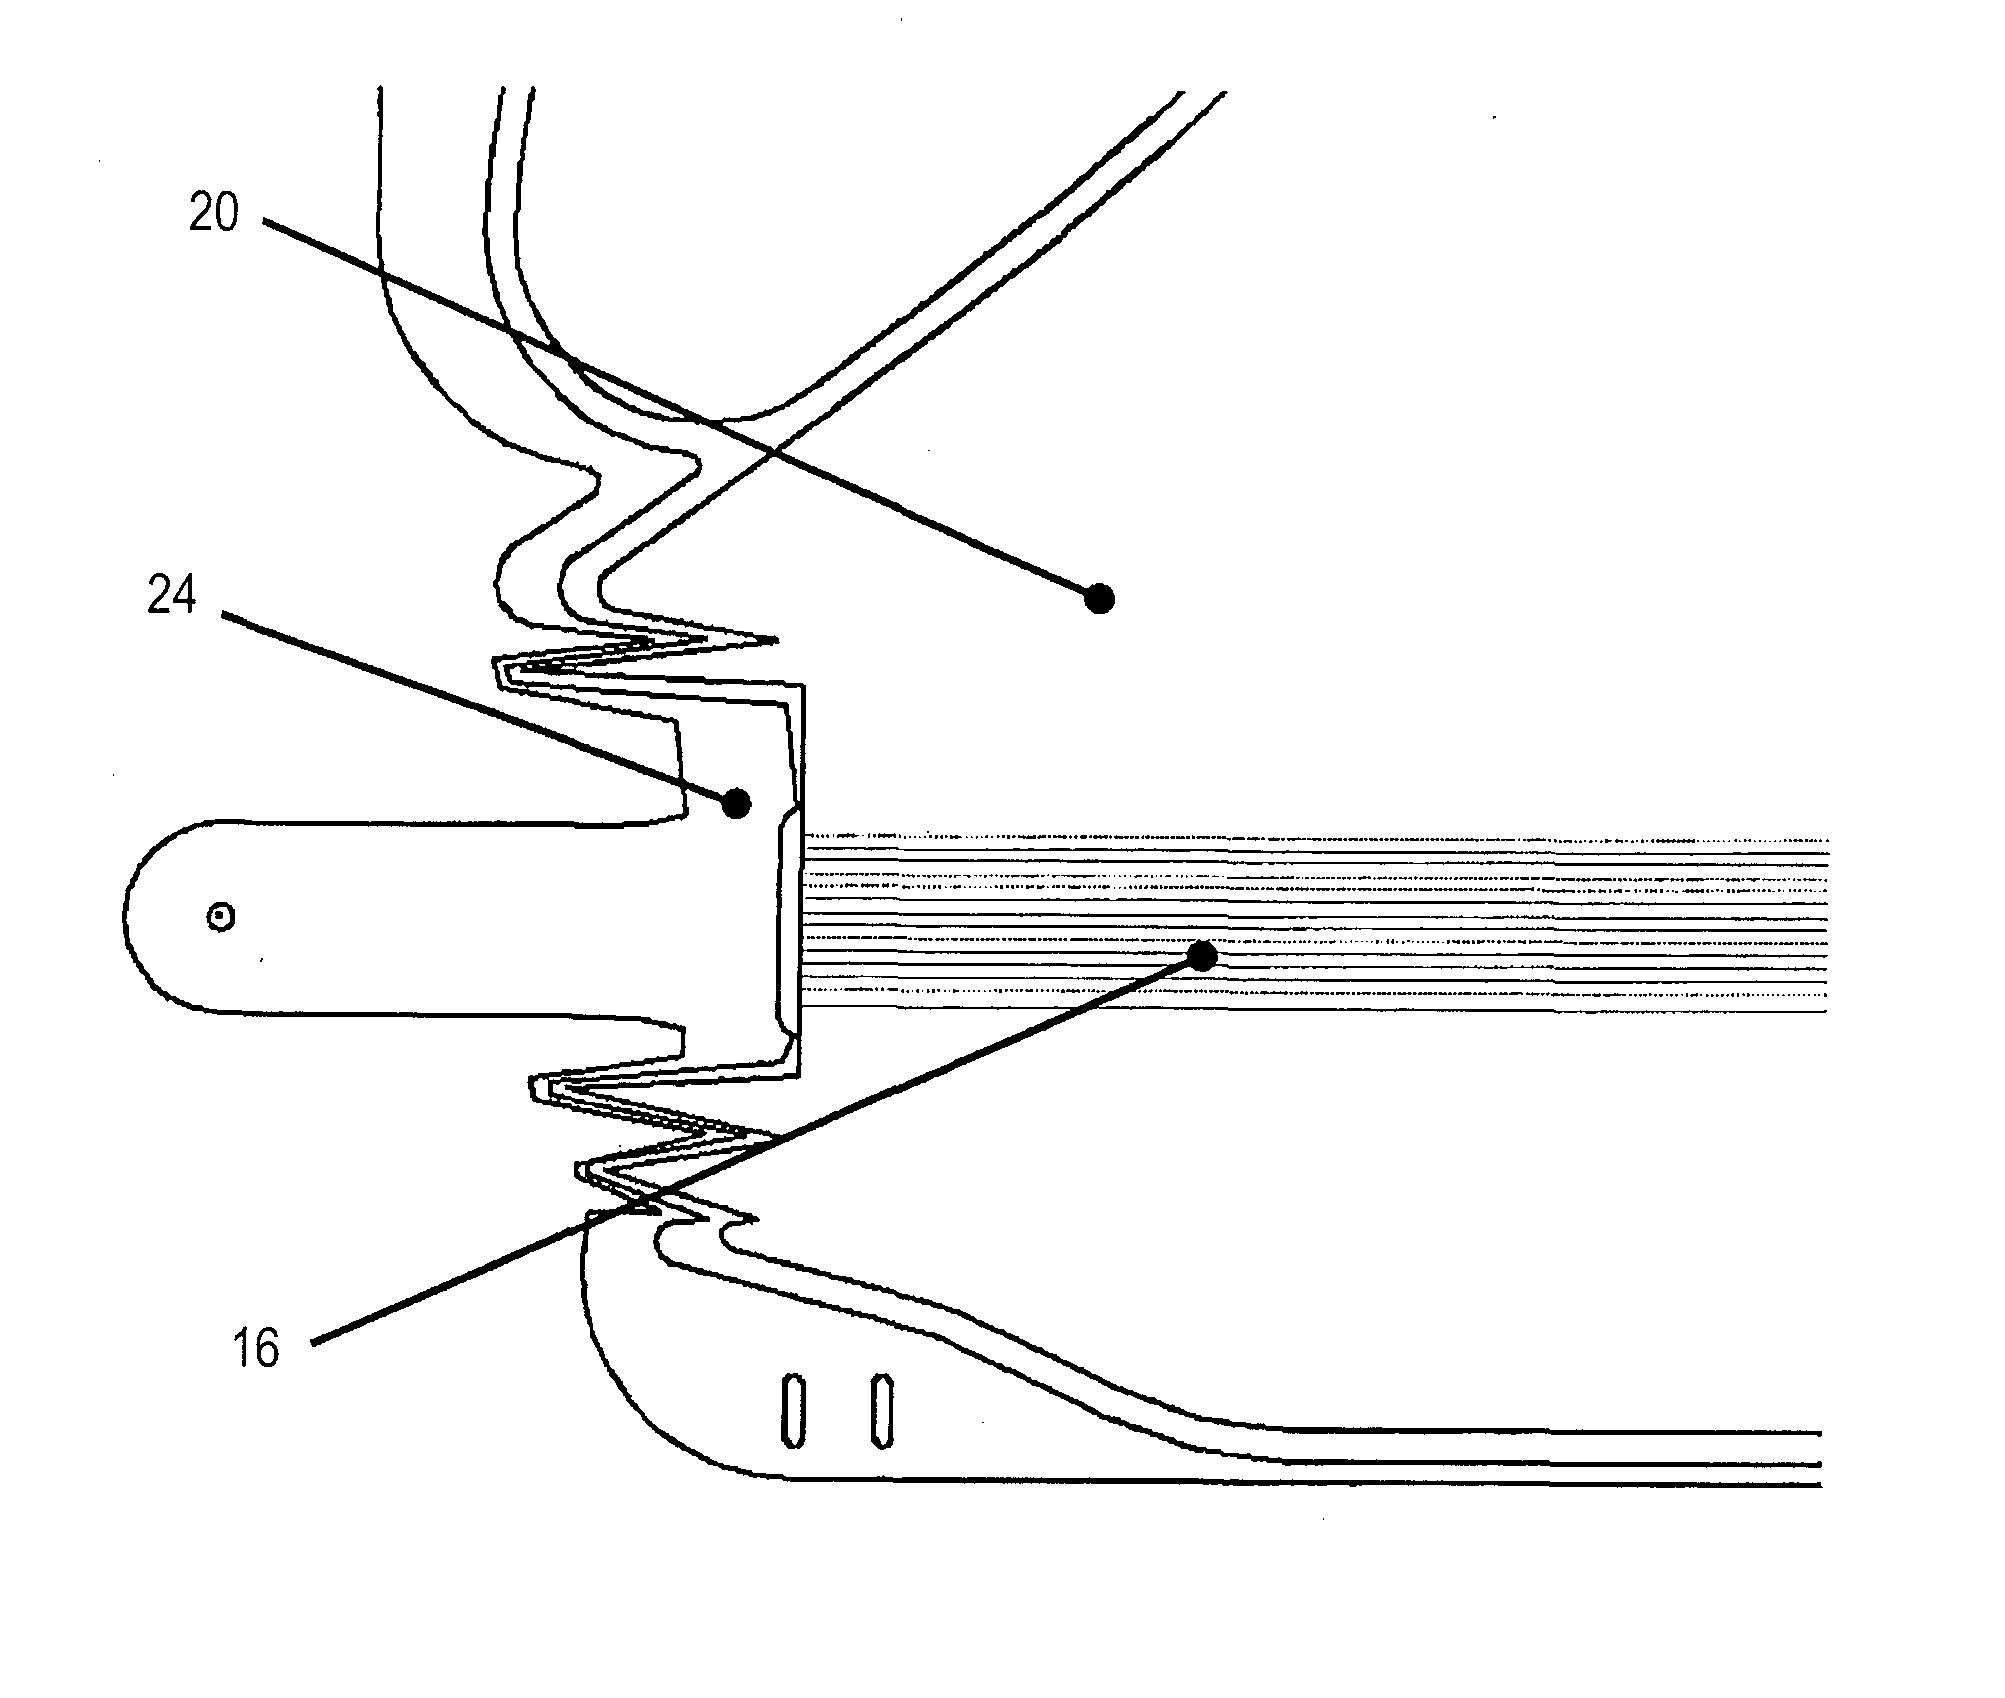 Airbag for a vehicle occupant restraint system